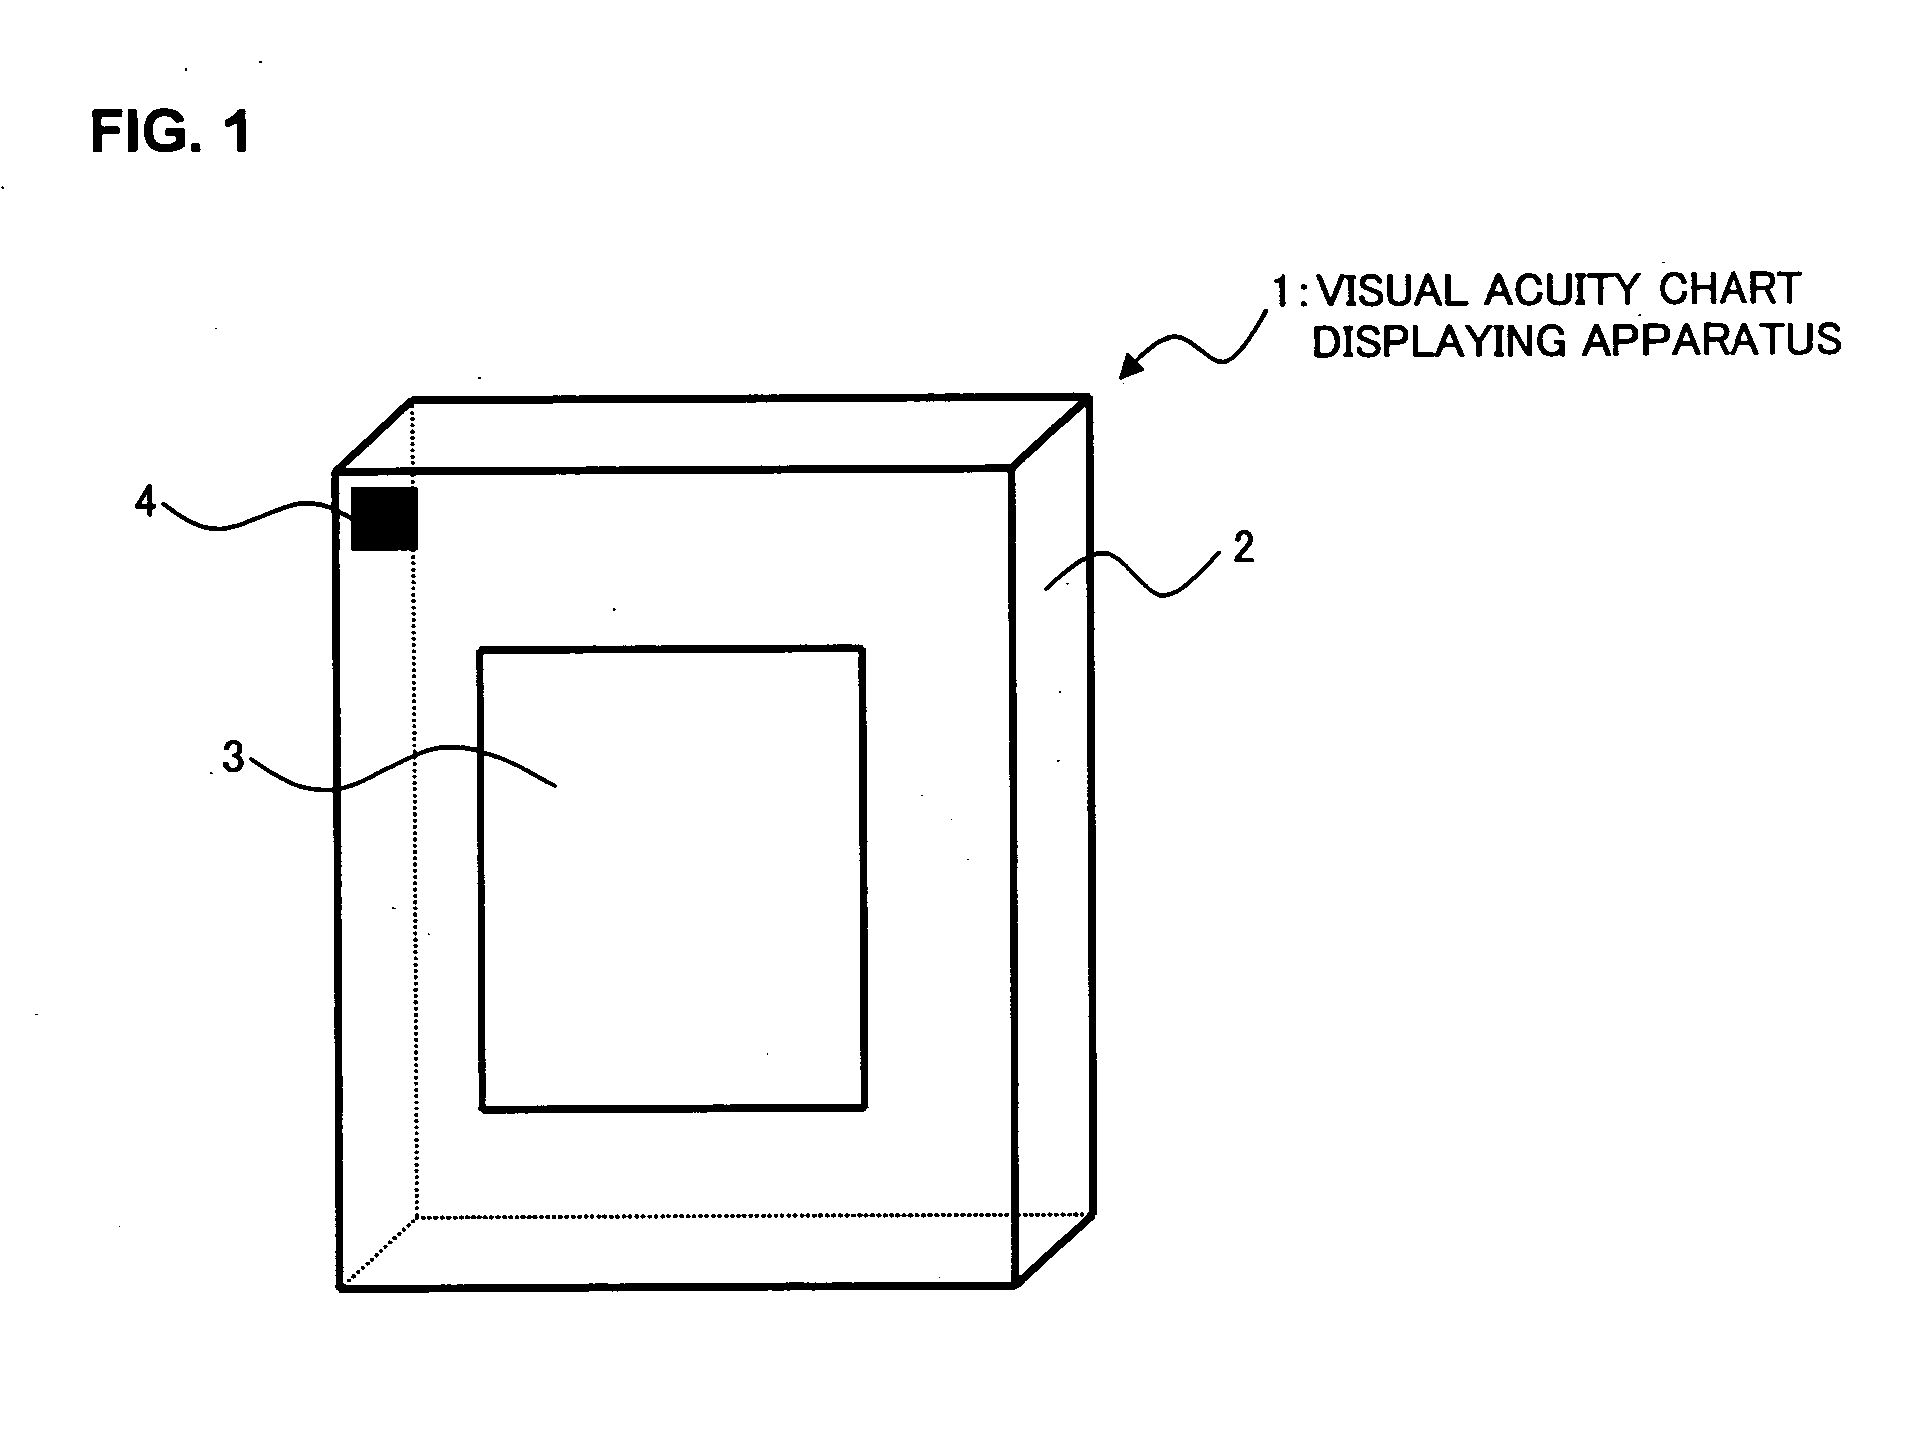 Visual acuity chart displaying apparatus and optometry apparatus